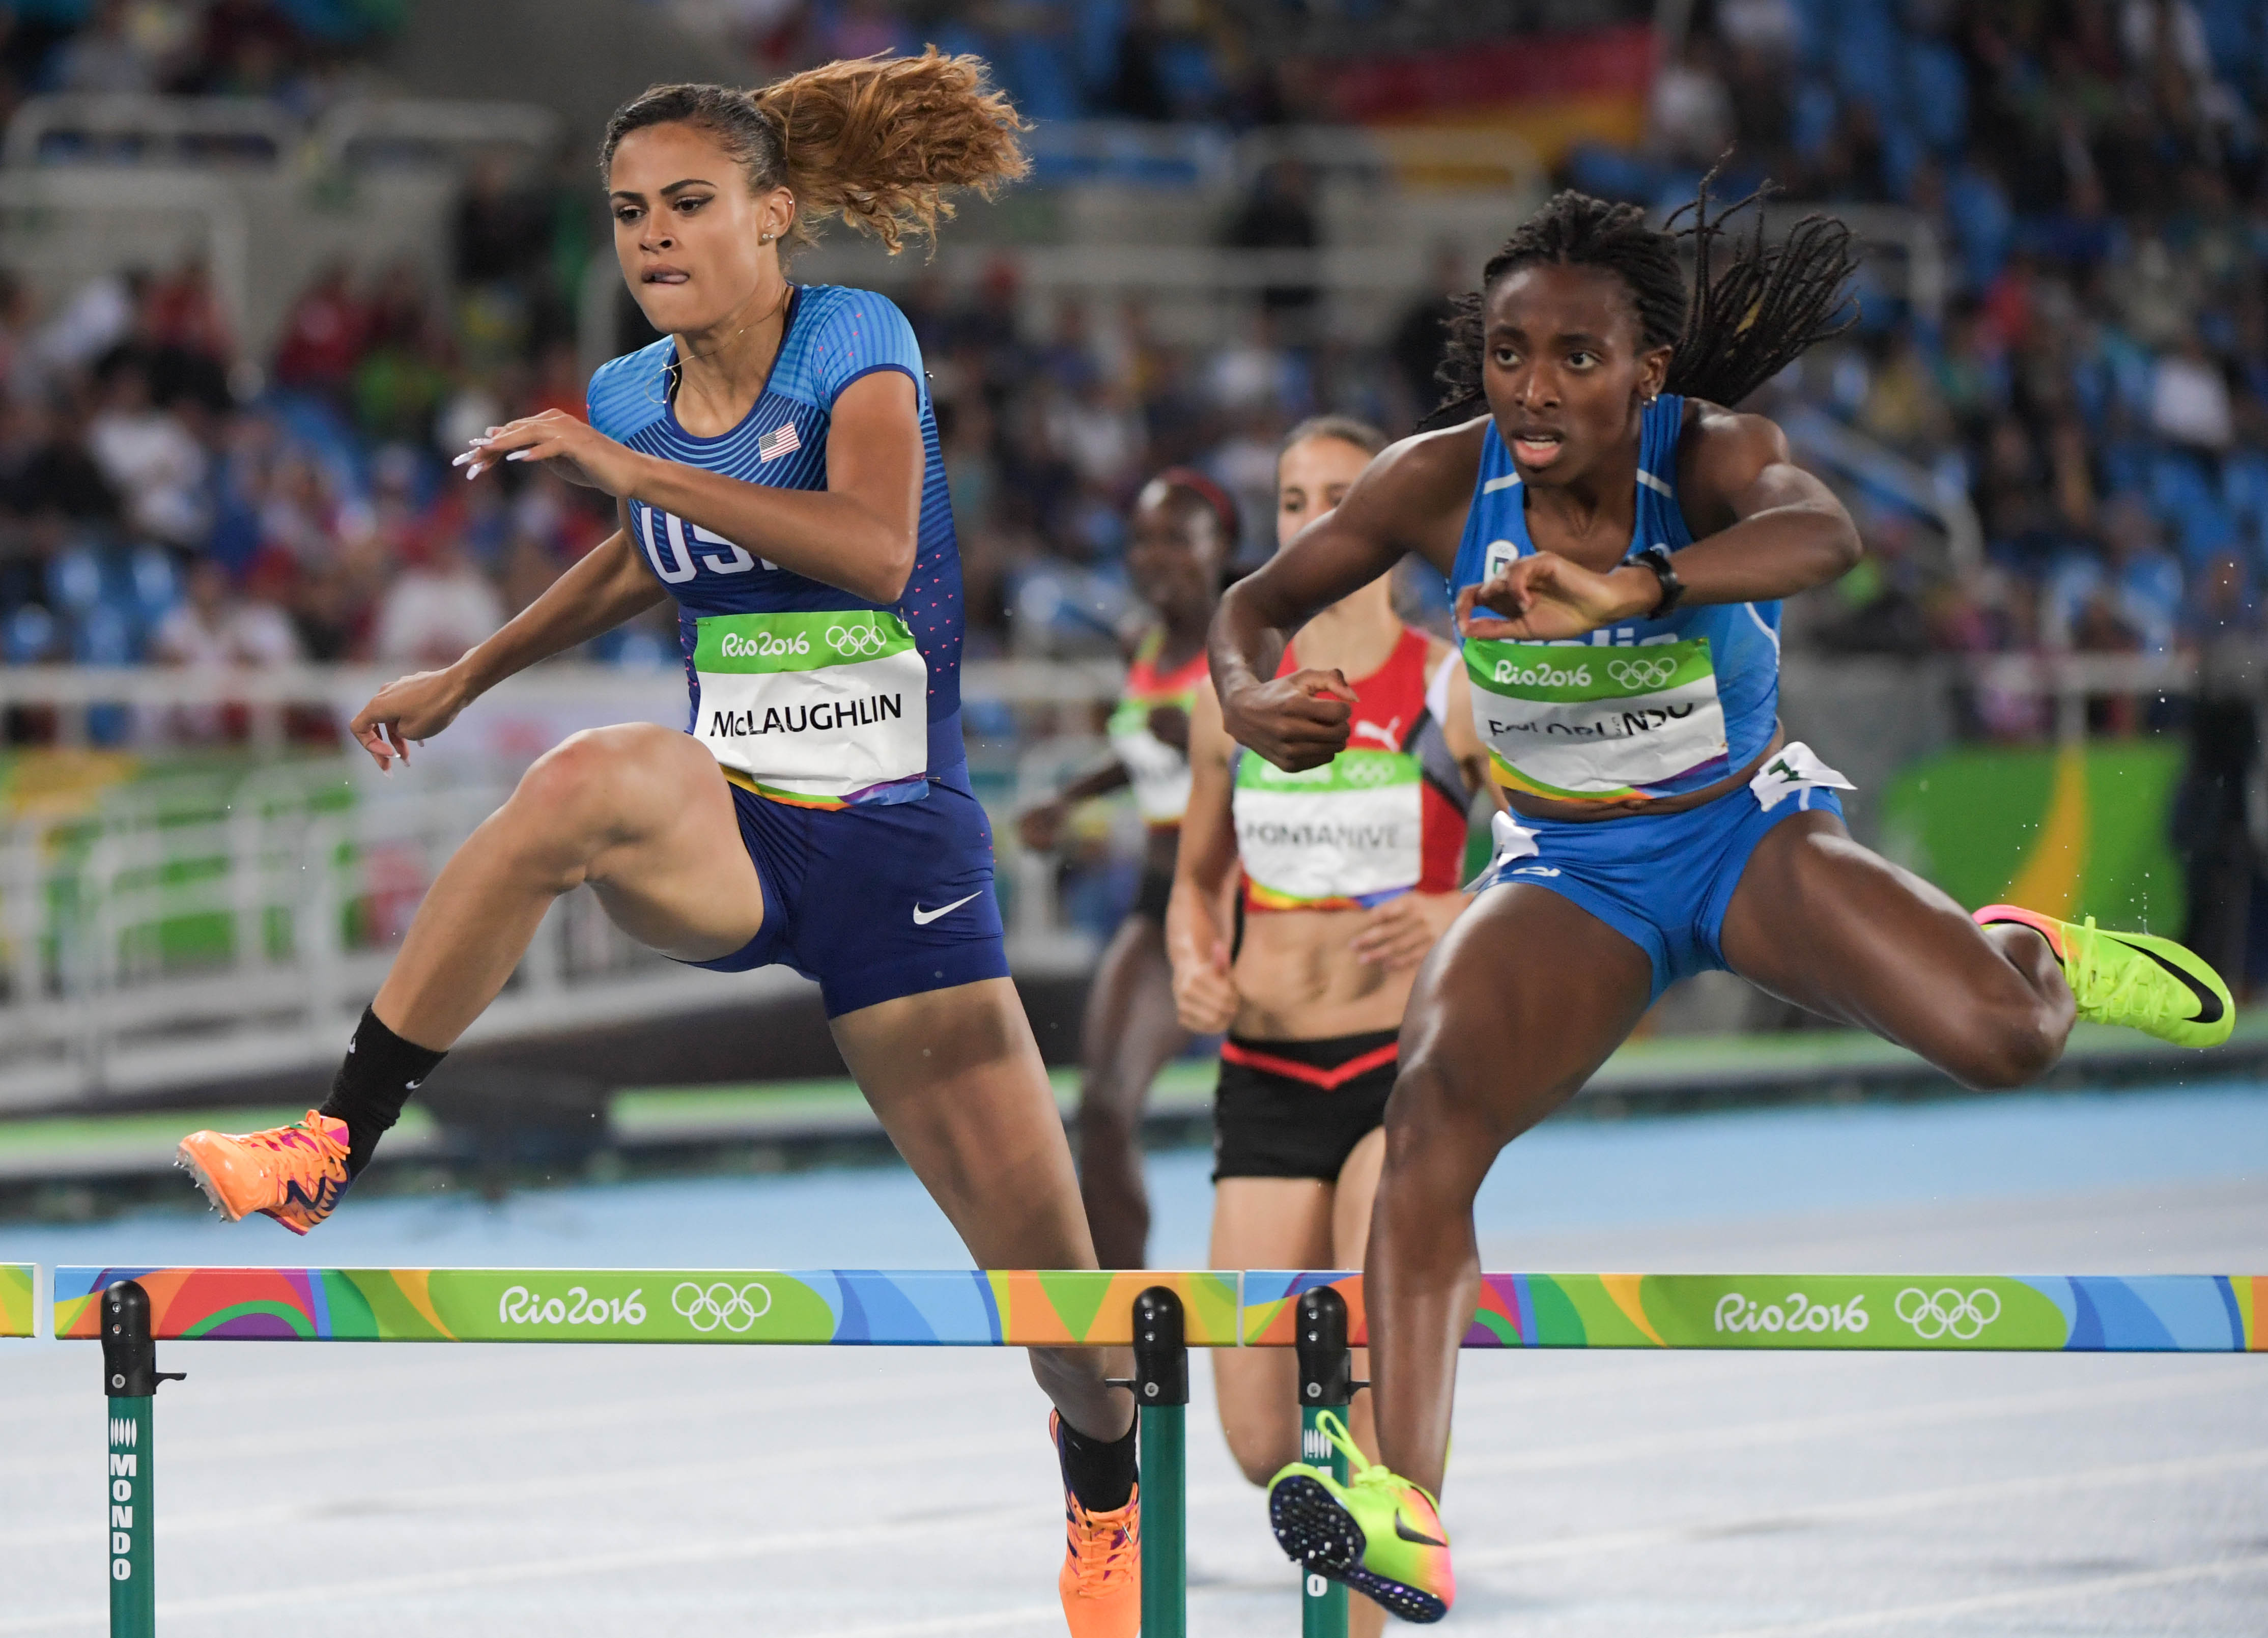 Aug 15, 2016; Rio de Janeiro, Brazil; Sydney McLaughlin (USA) competes in the women's 400m hurdles heat during track and field competition in the Rio 2016 Summer Olympic Games at Estadio Olimpico Joao Havelange. Mandatory Credit: Kirby Lee-USA TODAY Sports ORG XMIT: USATSI-GRP-882 ORIG FILE ID: 20160815_sal_al2_995.JPG